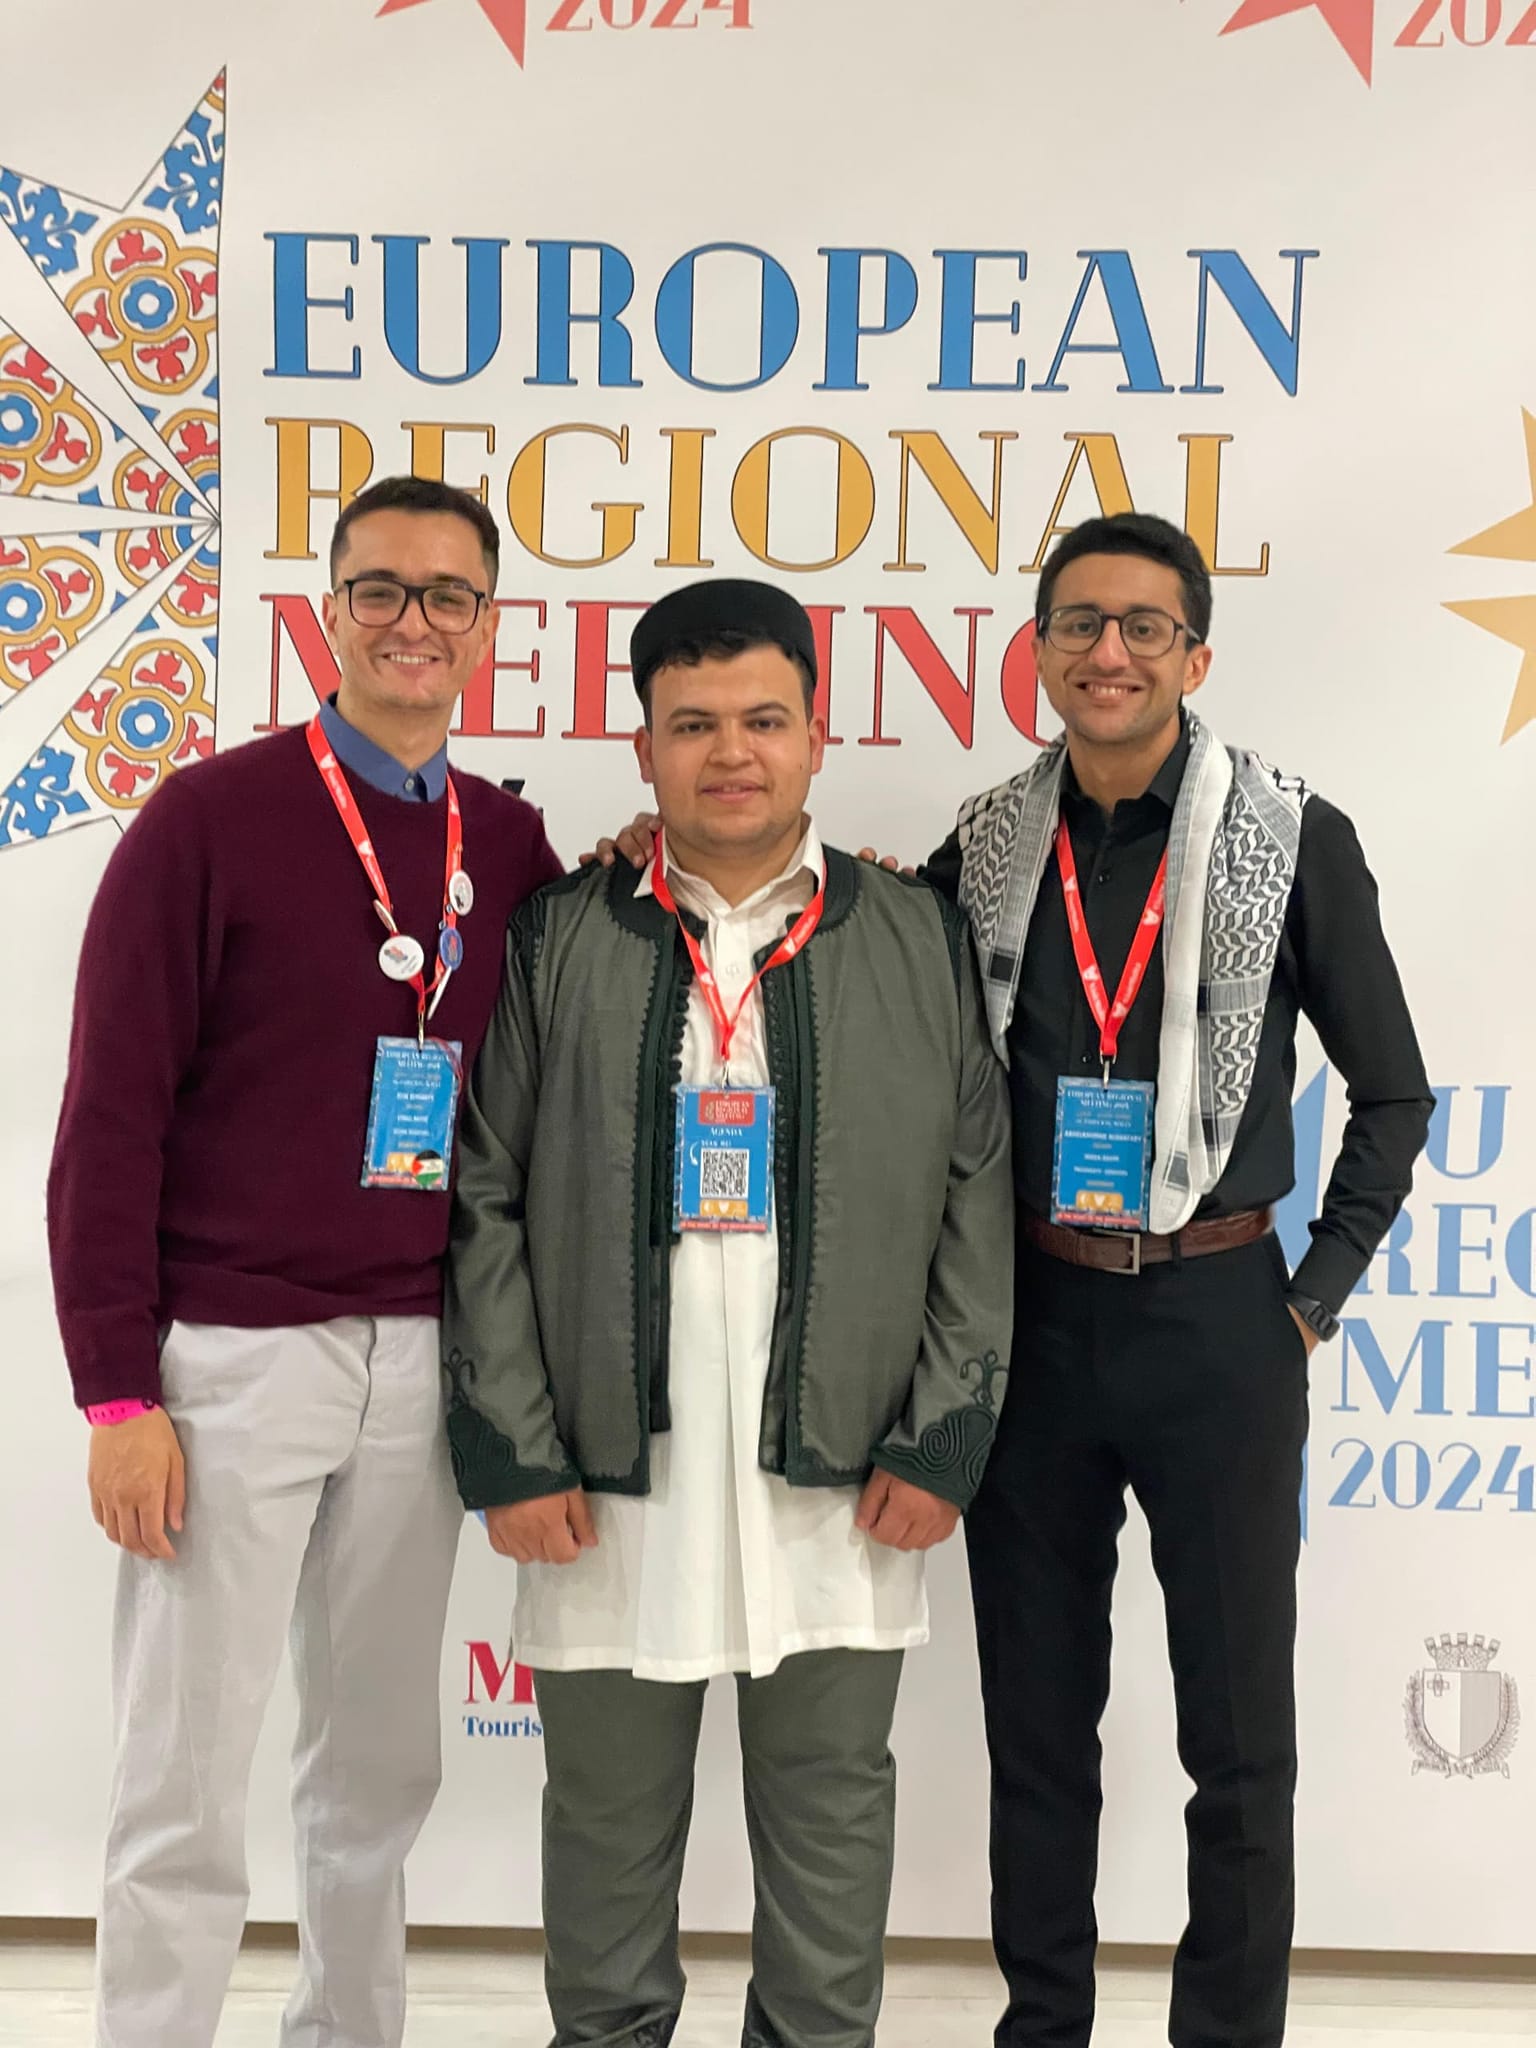 Libya was elected an honorary member of the International Forum for Medical Students in Europe.